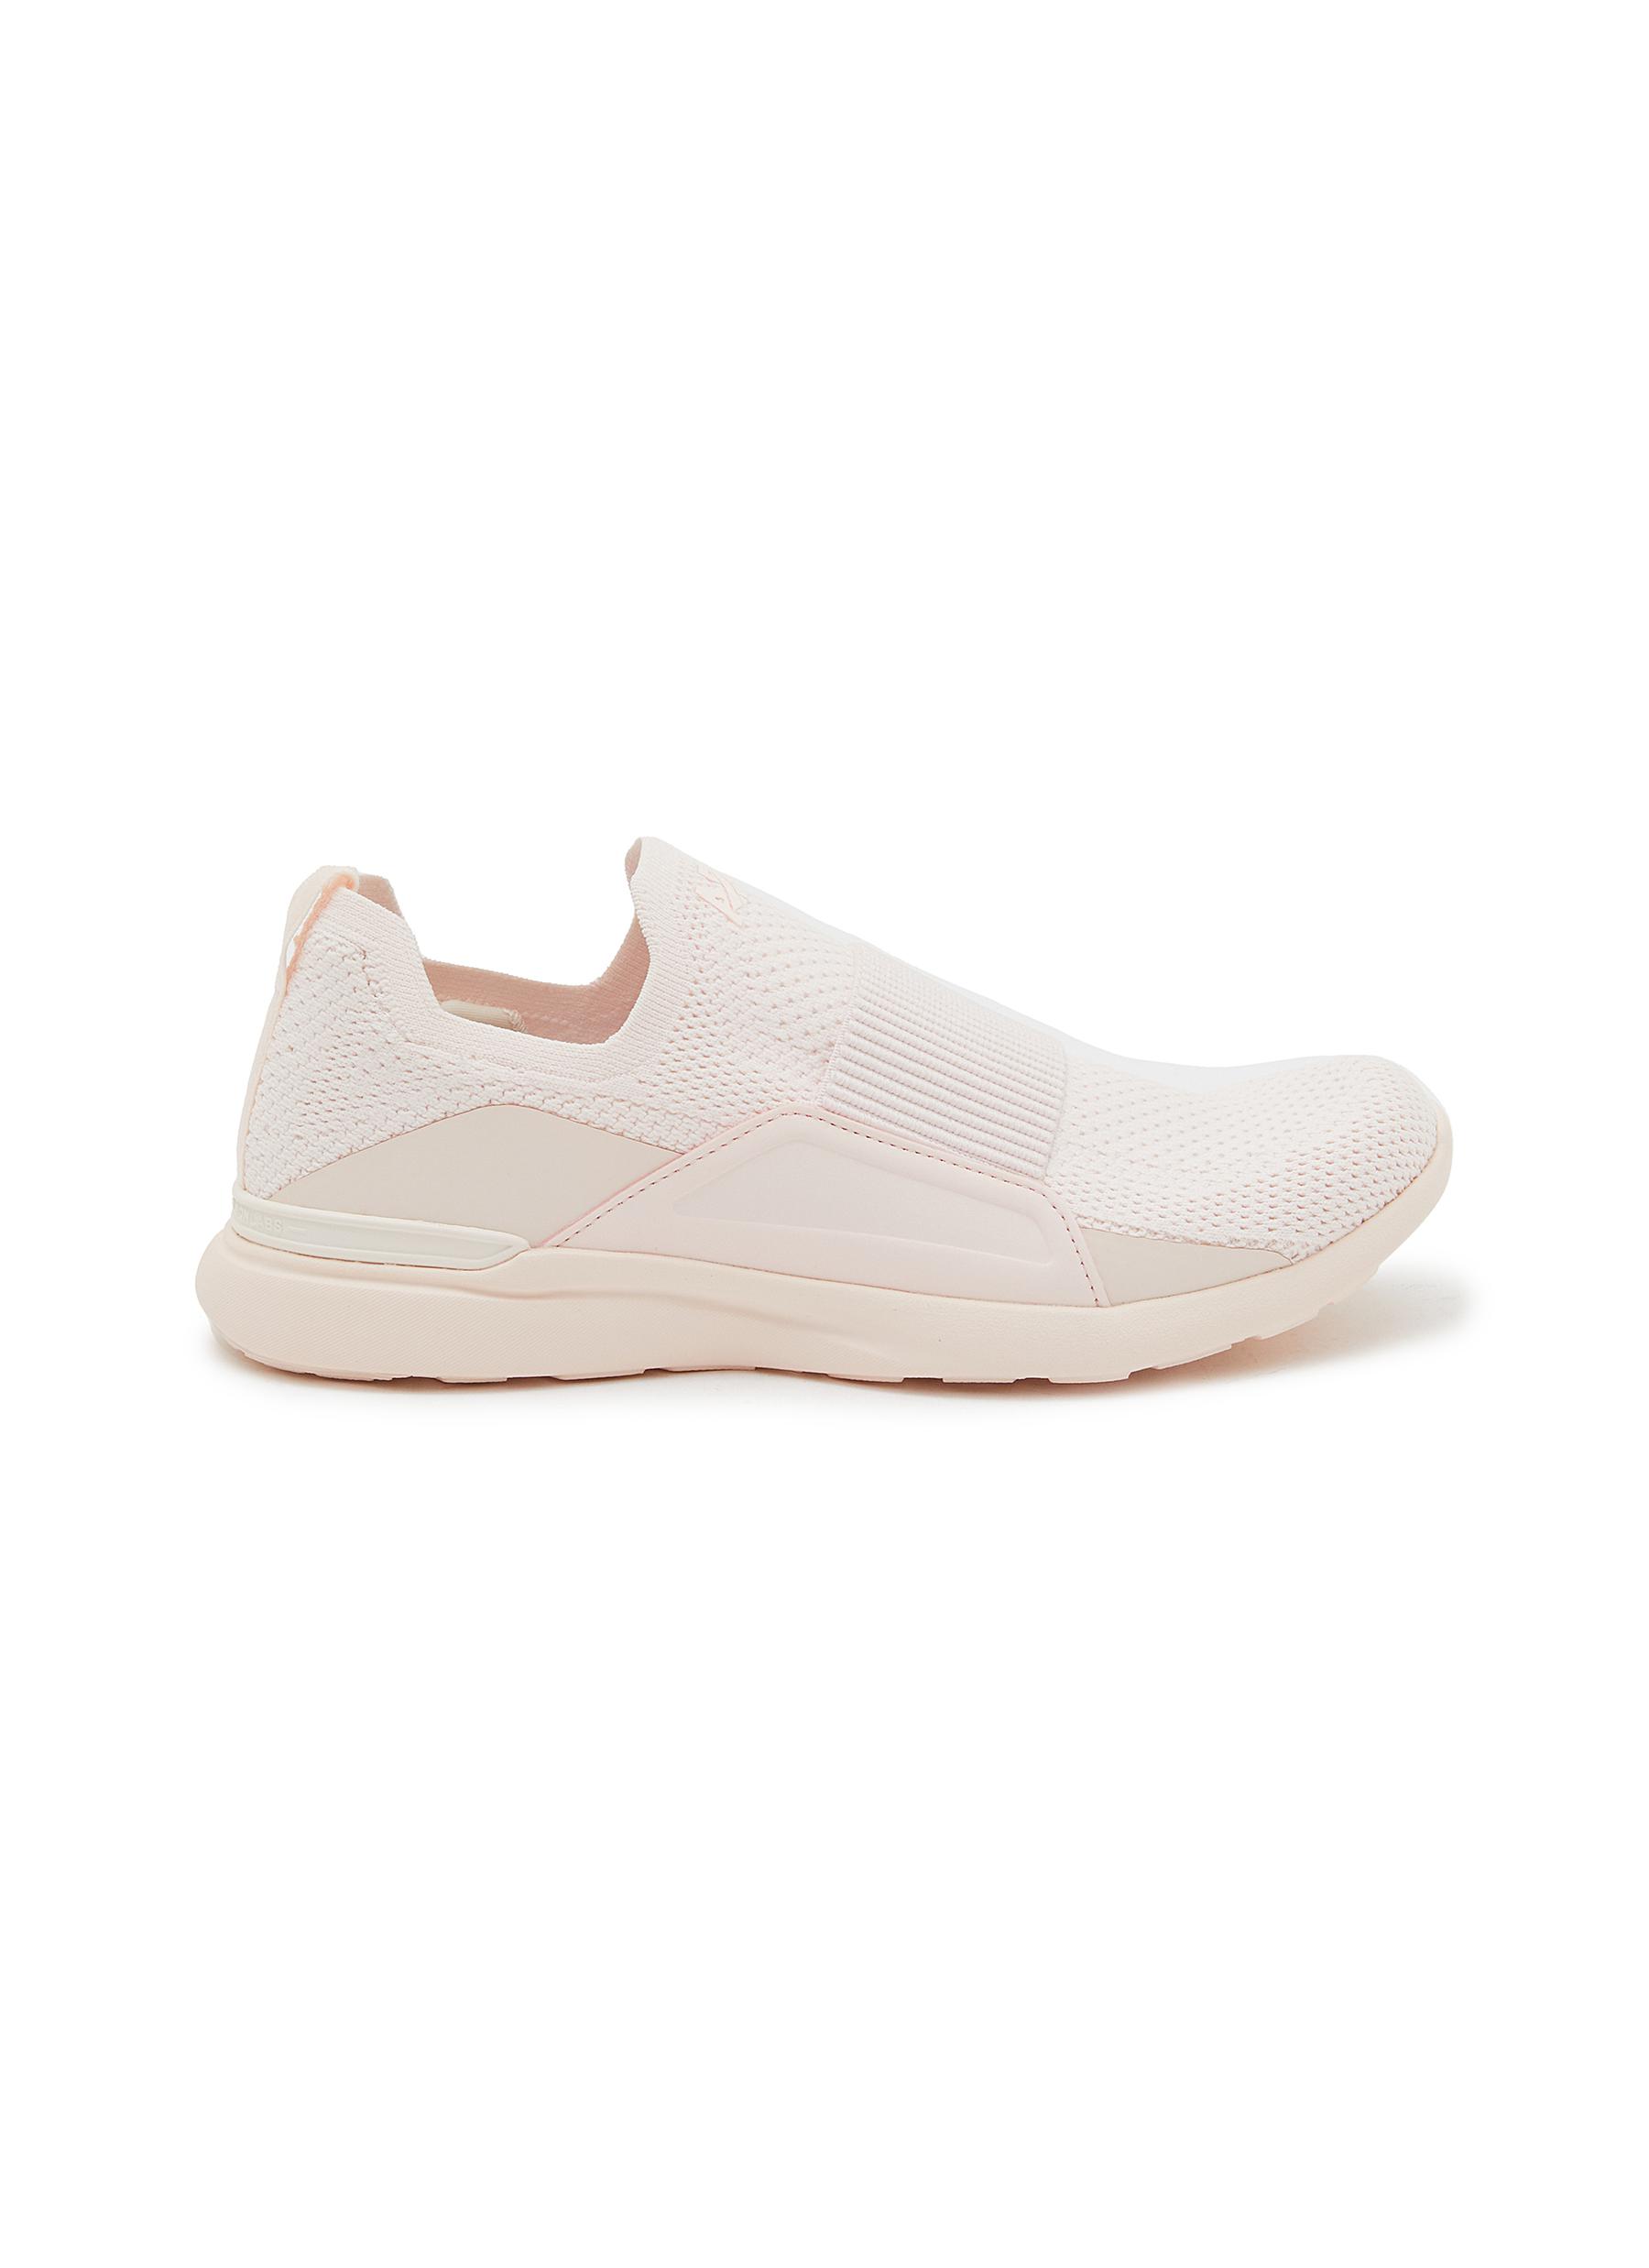 ATHLETIC PROPULSION LABS, Techloom Bliss Low Top Sneakers